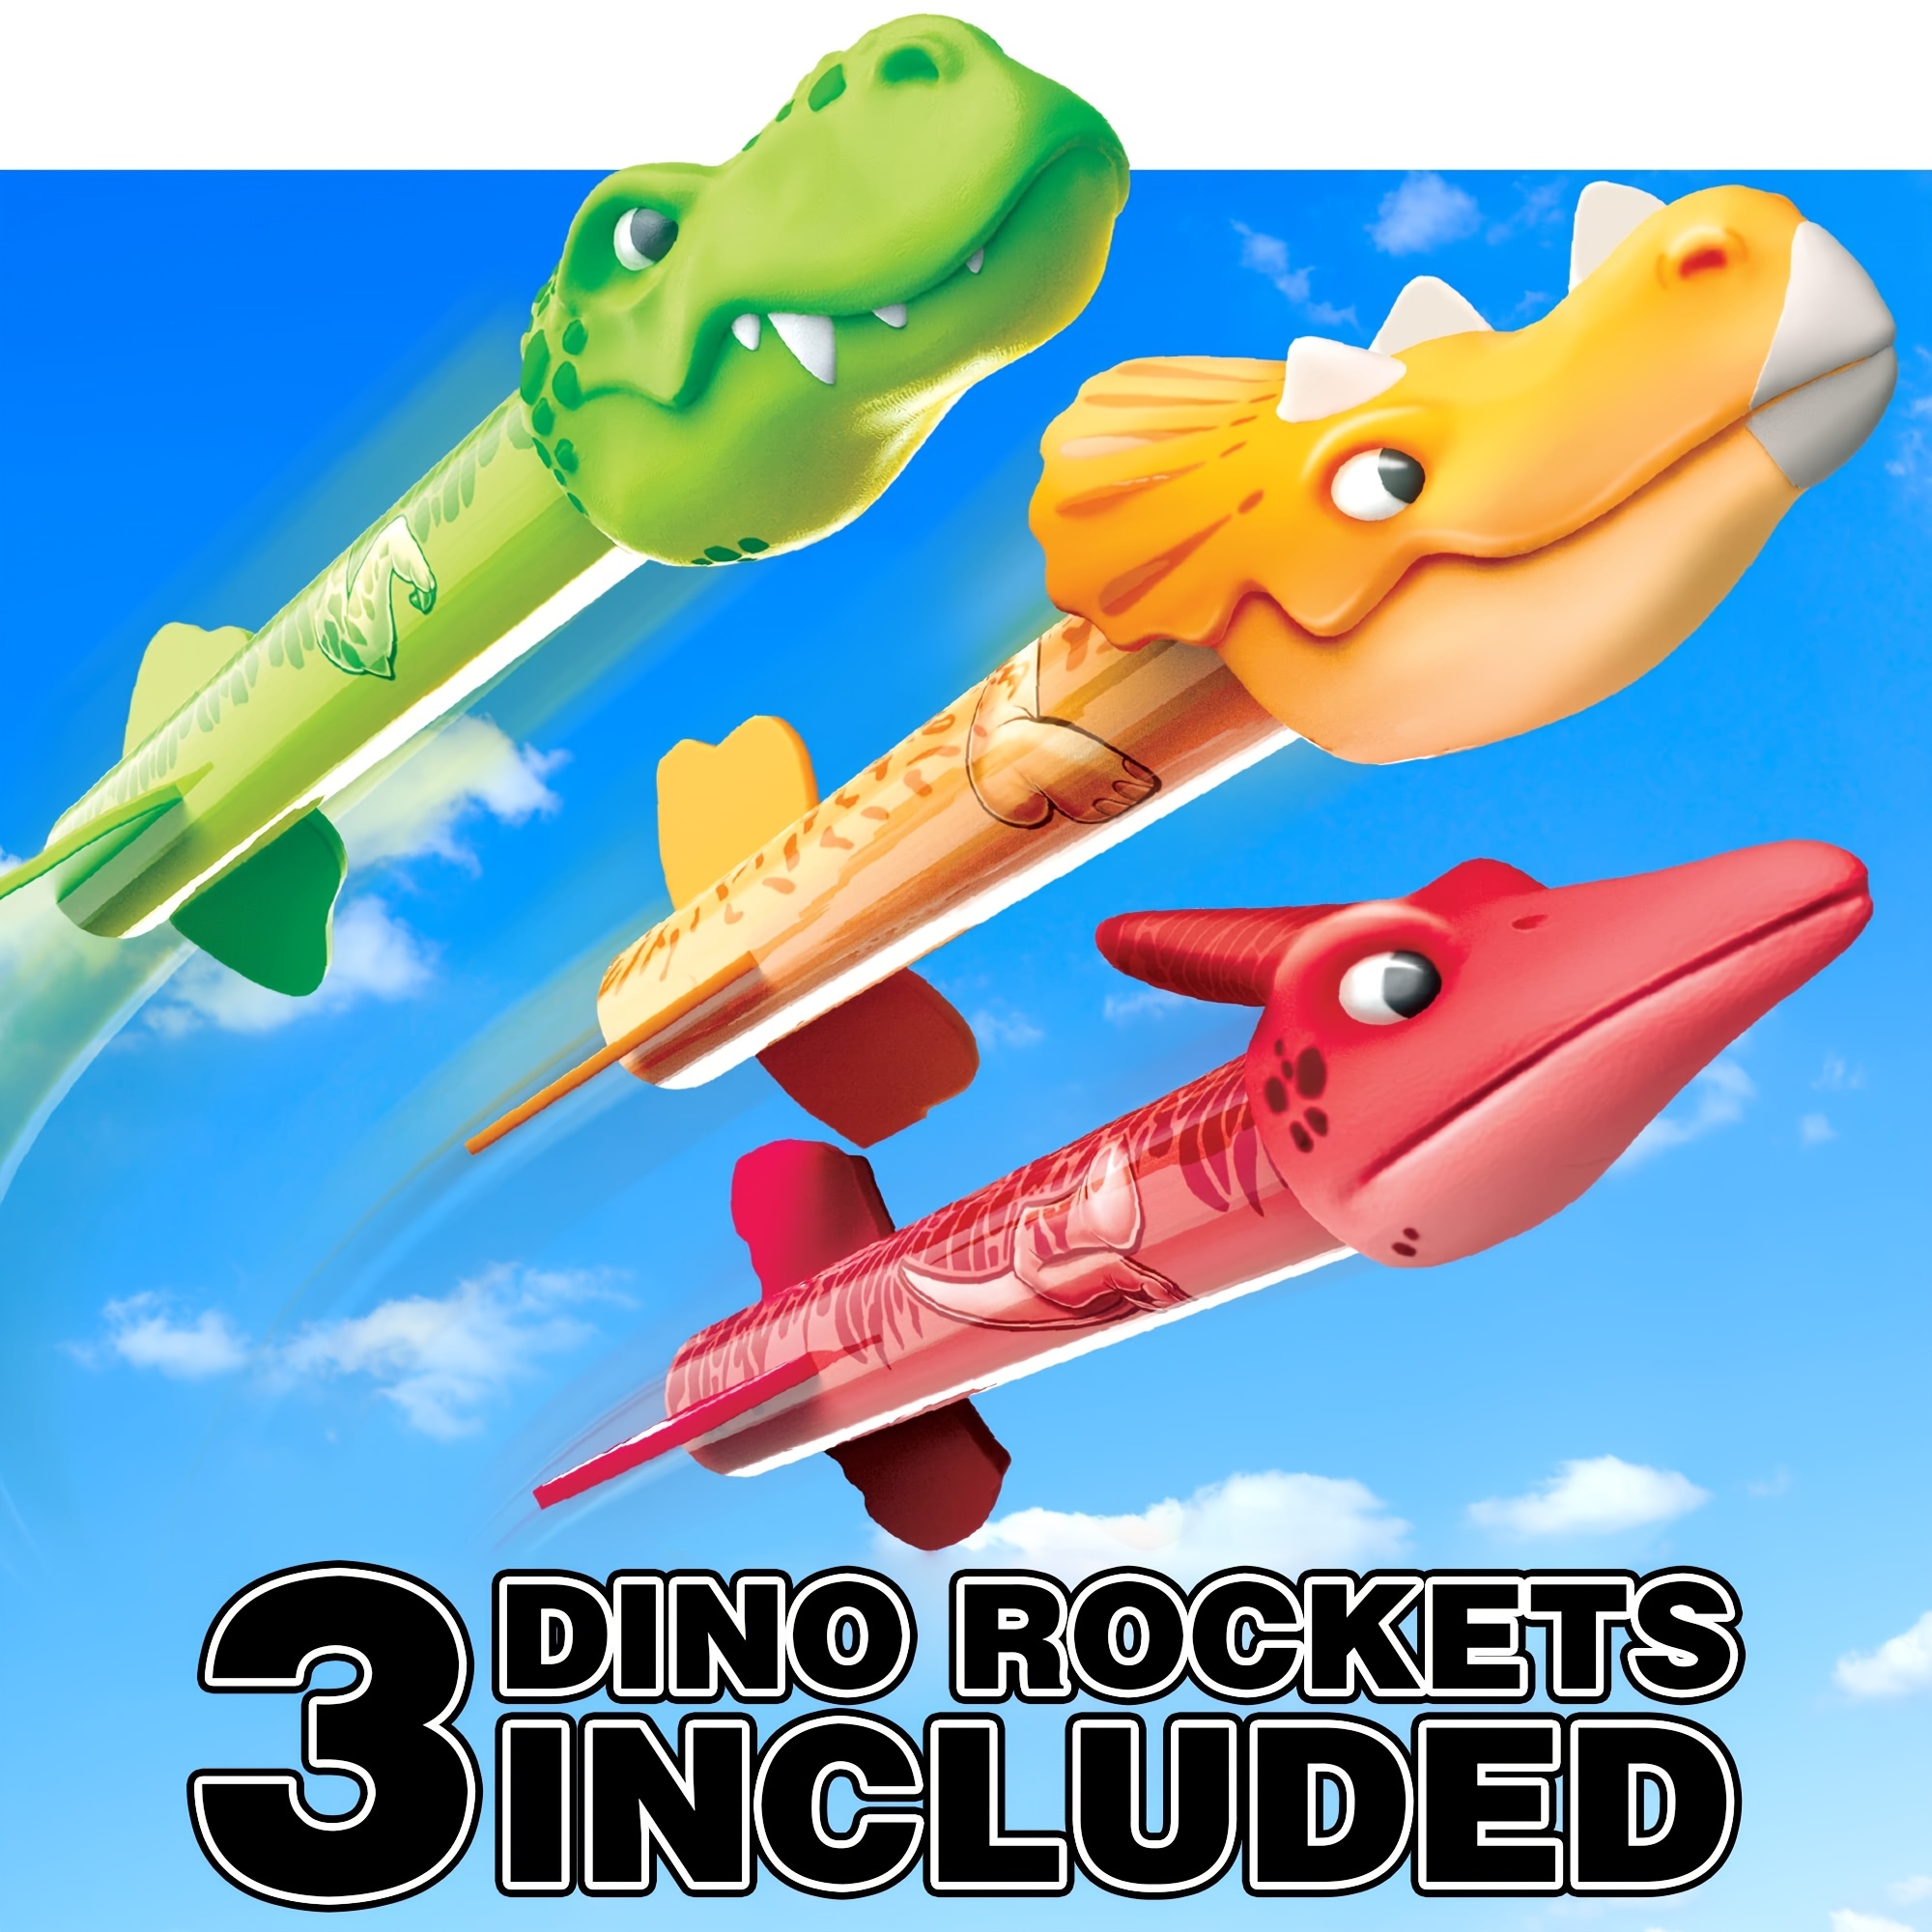  MindSprout Dino Blasters, Rocket Launcher for Kids - Launch up  to 100 ft. Birthday Gift, for Boys & Girls Age 3, 4, 5, 6, 7, Years Old -  Outdoor Toys, Family